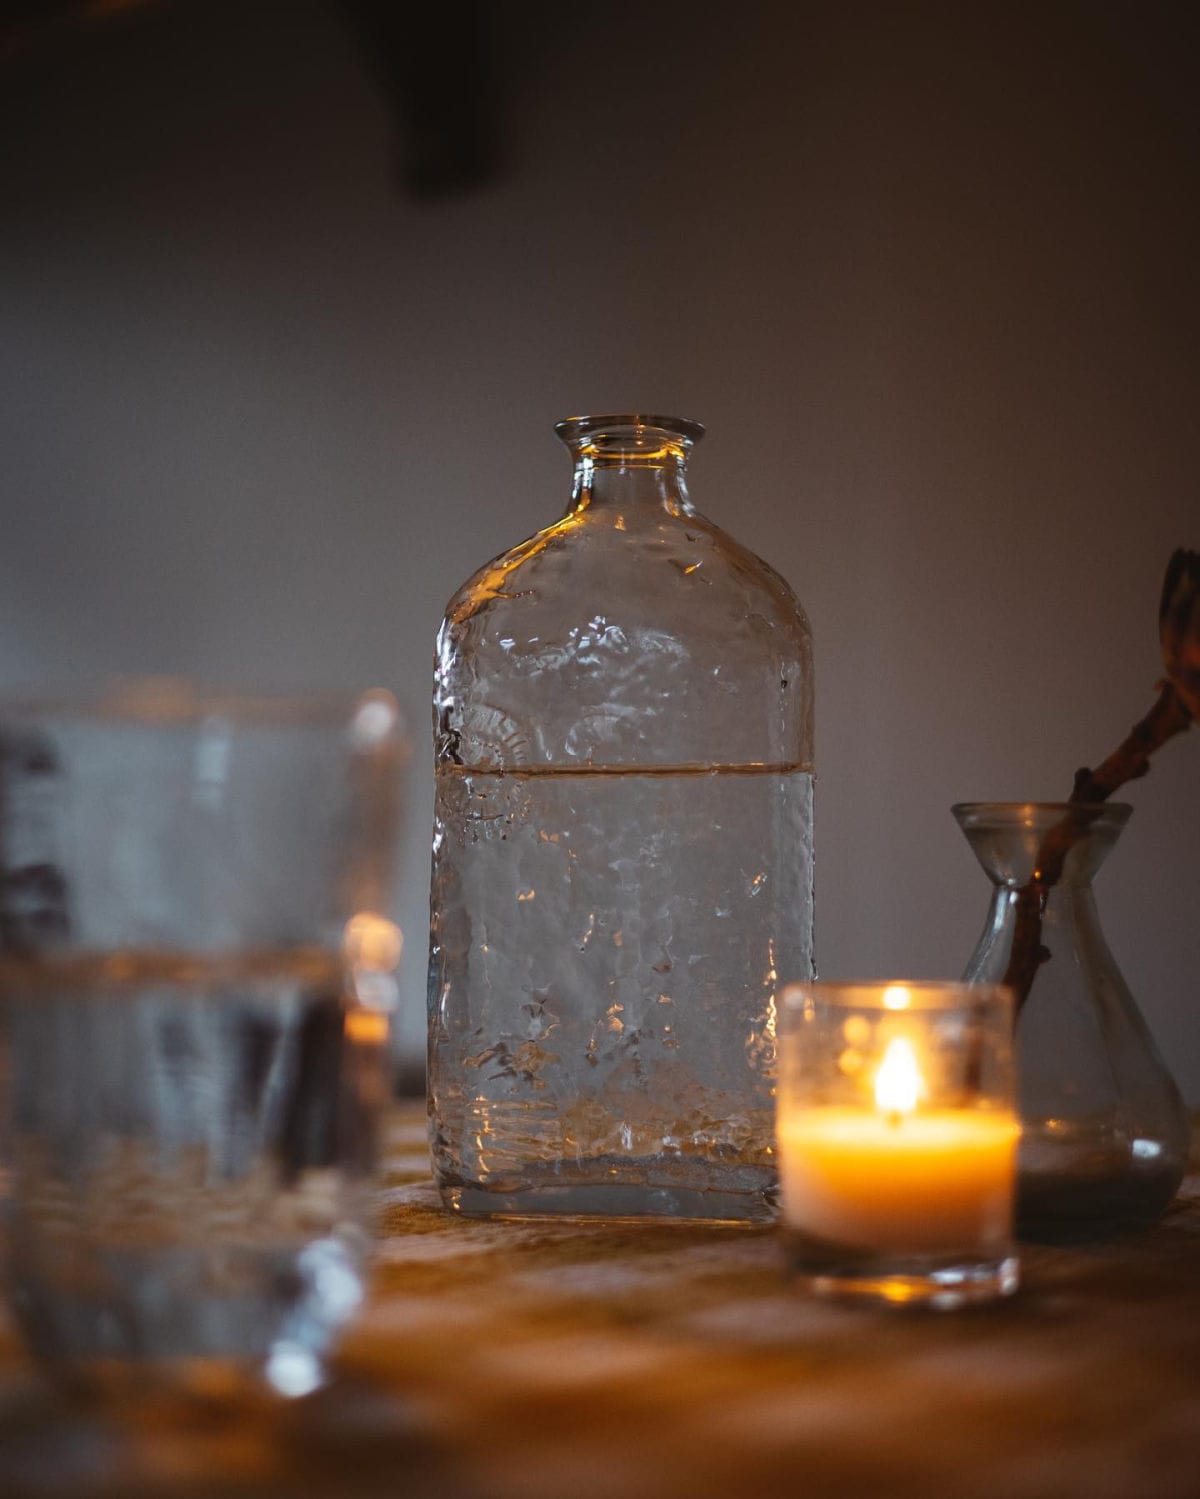 Old spirit bottle reused as a water bottle, on a table with glasses and candles.